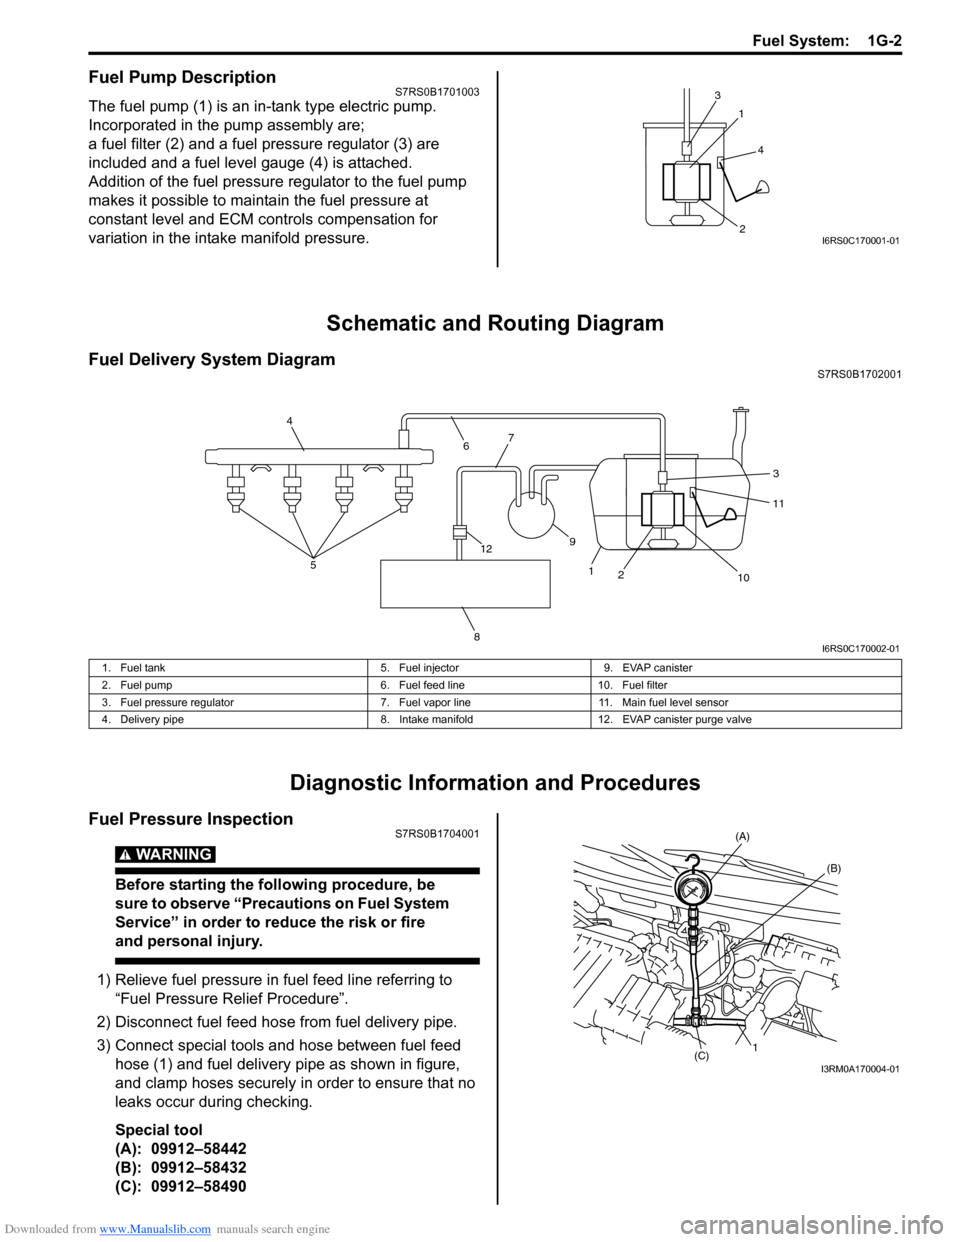 SUZUKI SWIFT 2006 2.G Service Workshop Manual Downloaded from www.Manualslib.com manuals search engine Fuel System:  1G-2
Fuel Pump DescriptionS7RS0B1701003
The fuel pump (1) is an in-tank type electric pump. 
Incorporated in the pump assembly ar